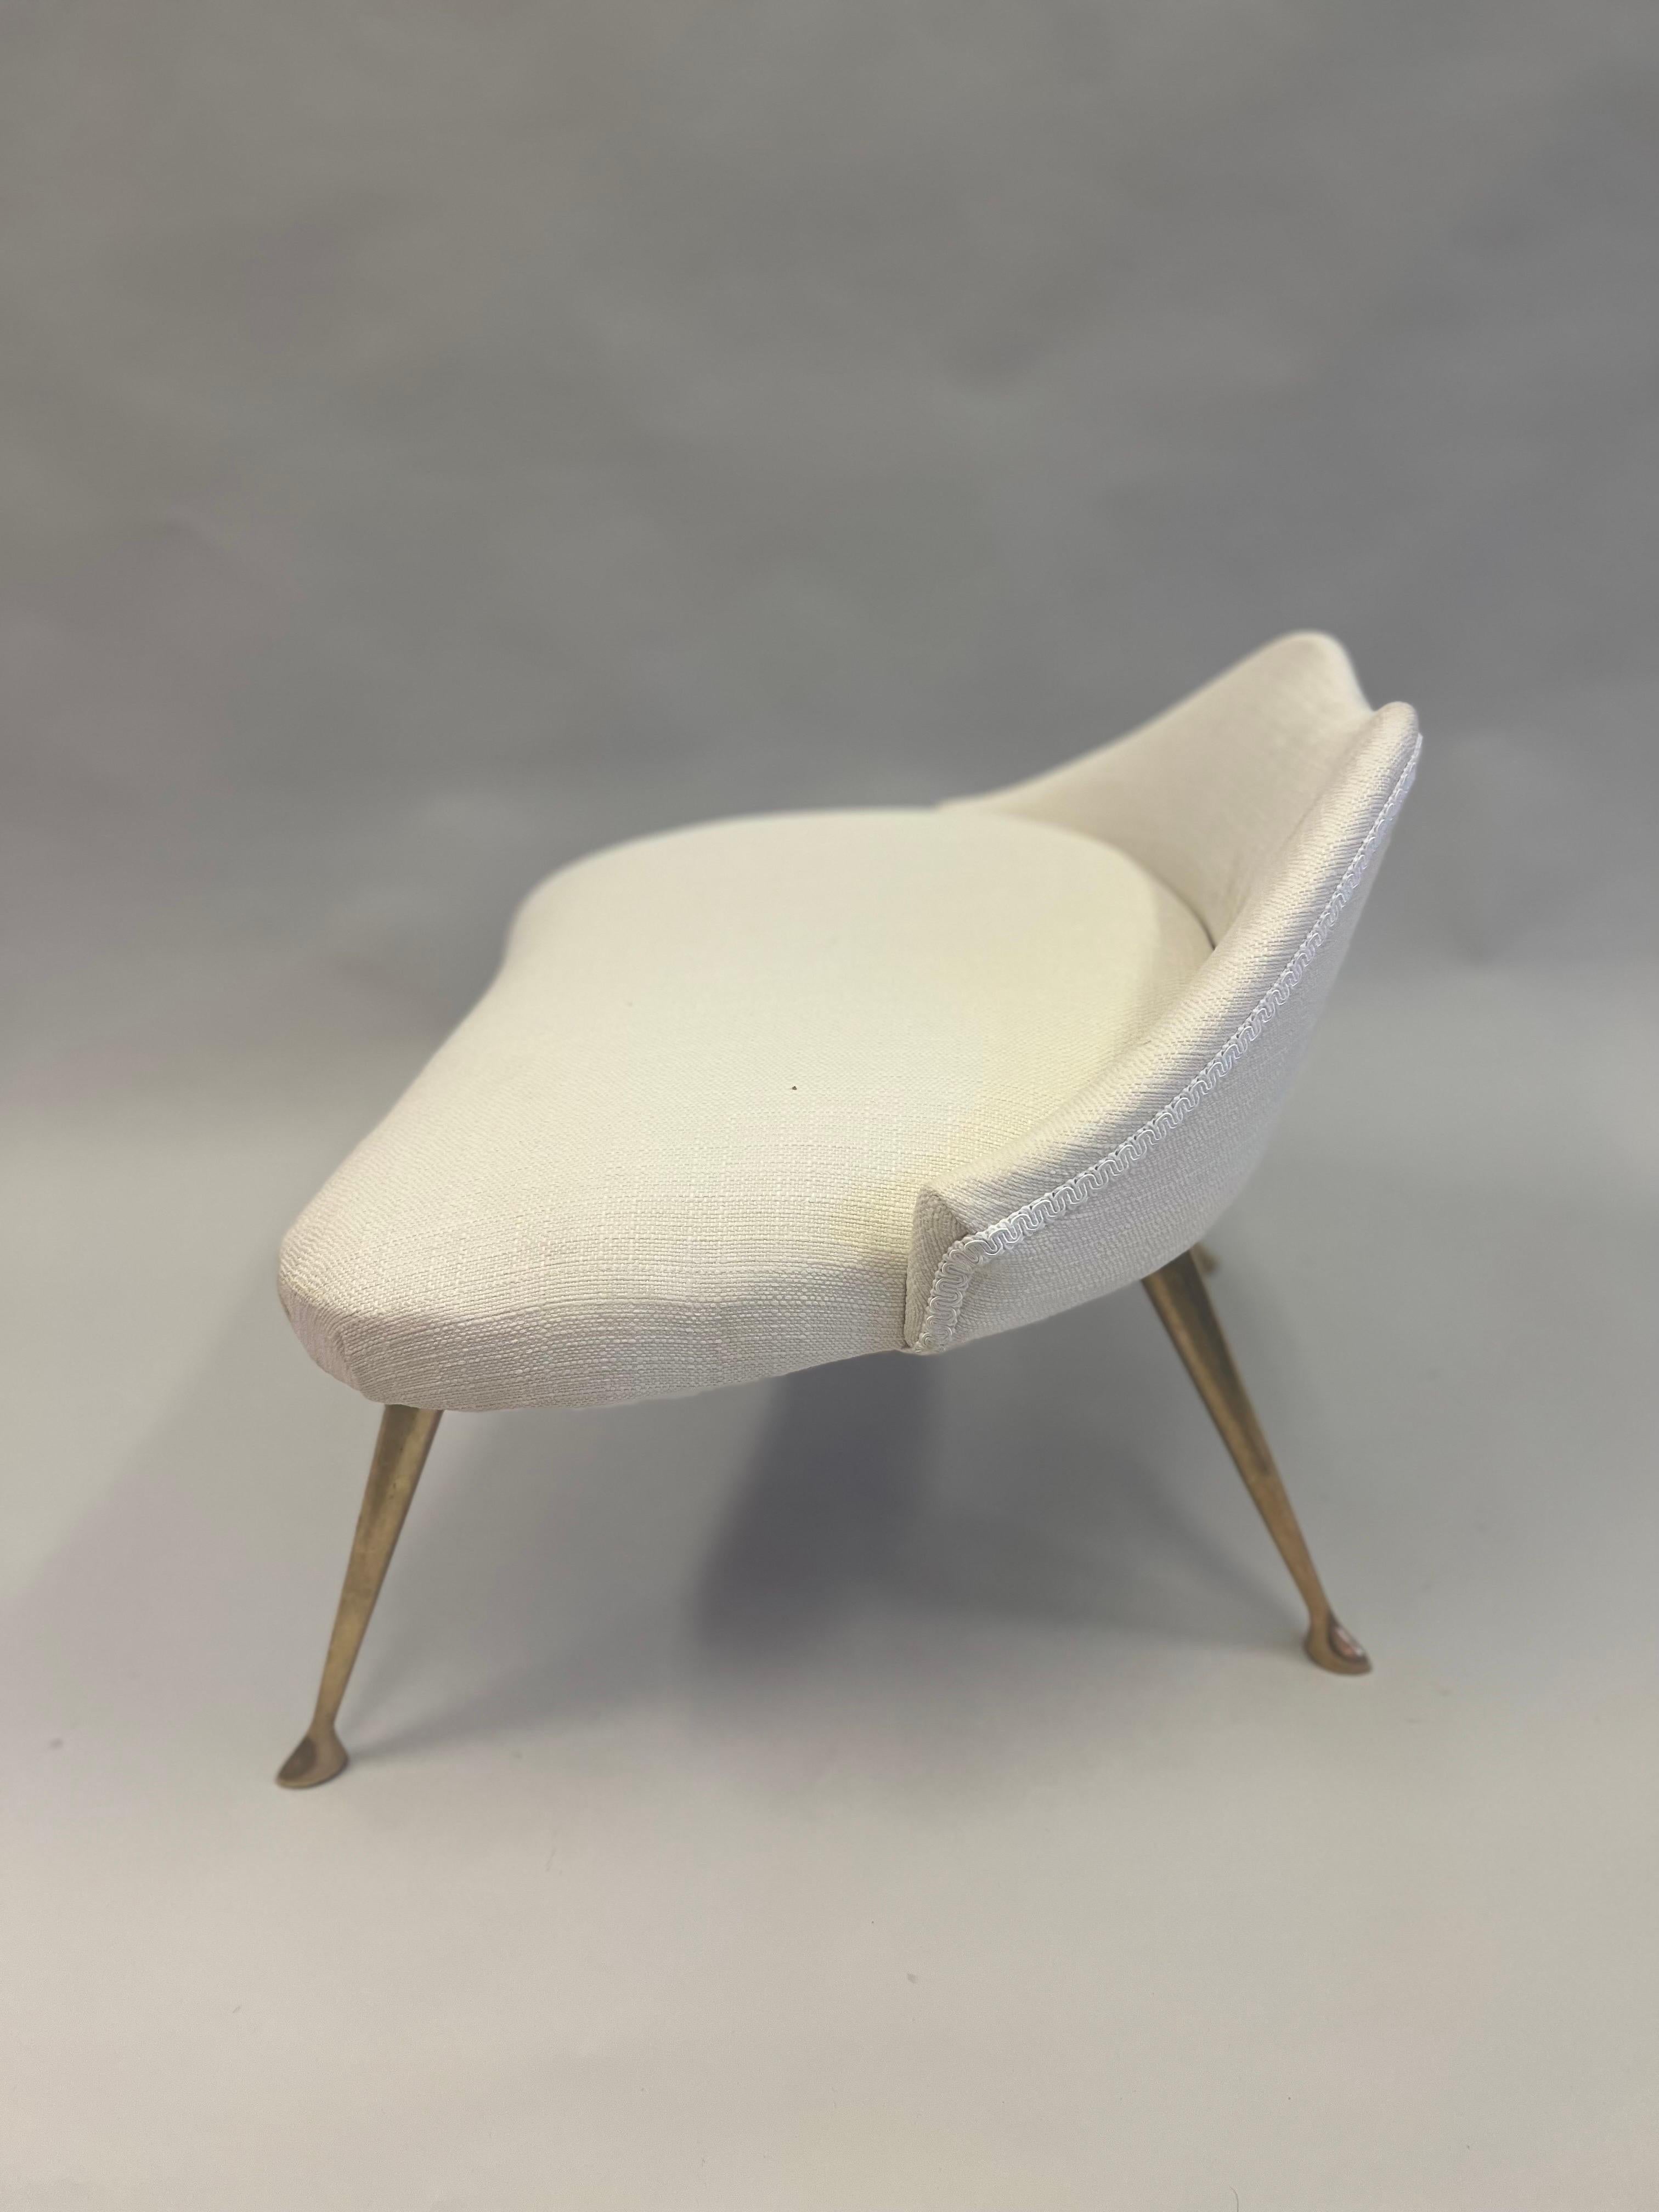 Italian Mid-CenturyModern Brass & Cotton Vanity Chair Attributed to Marco Zanuso For Sale 7